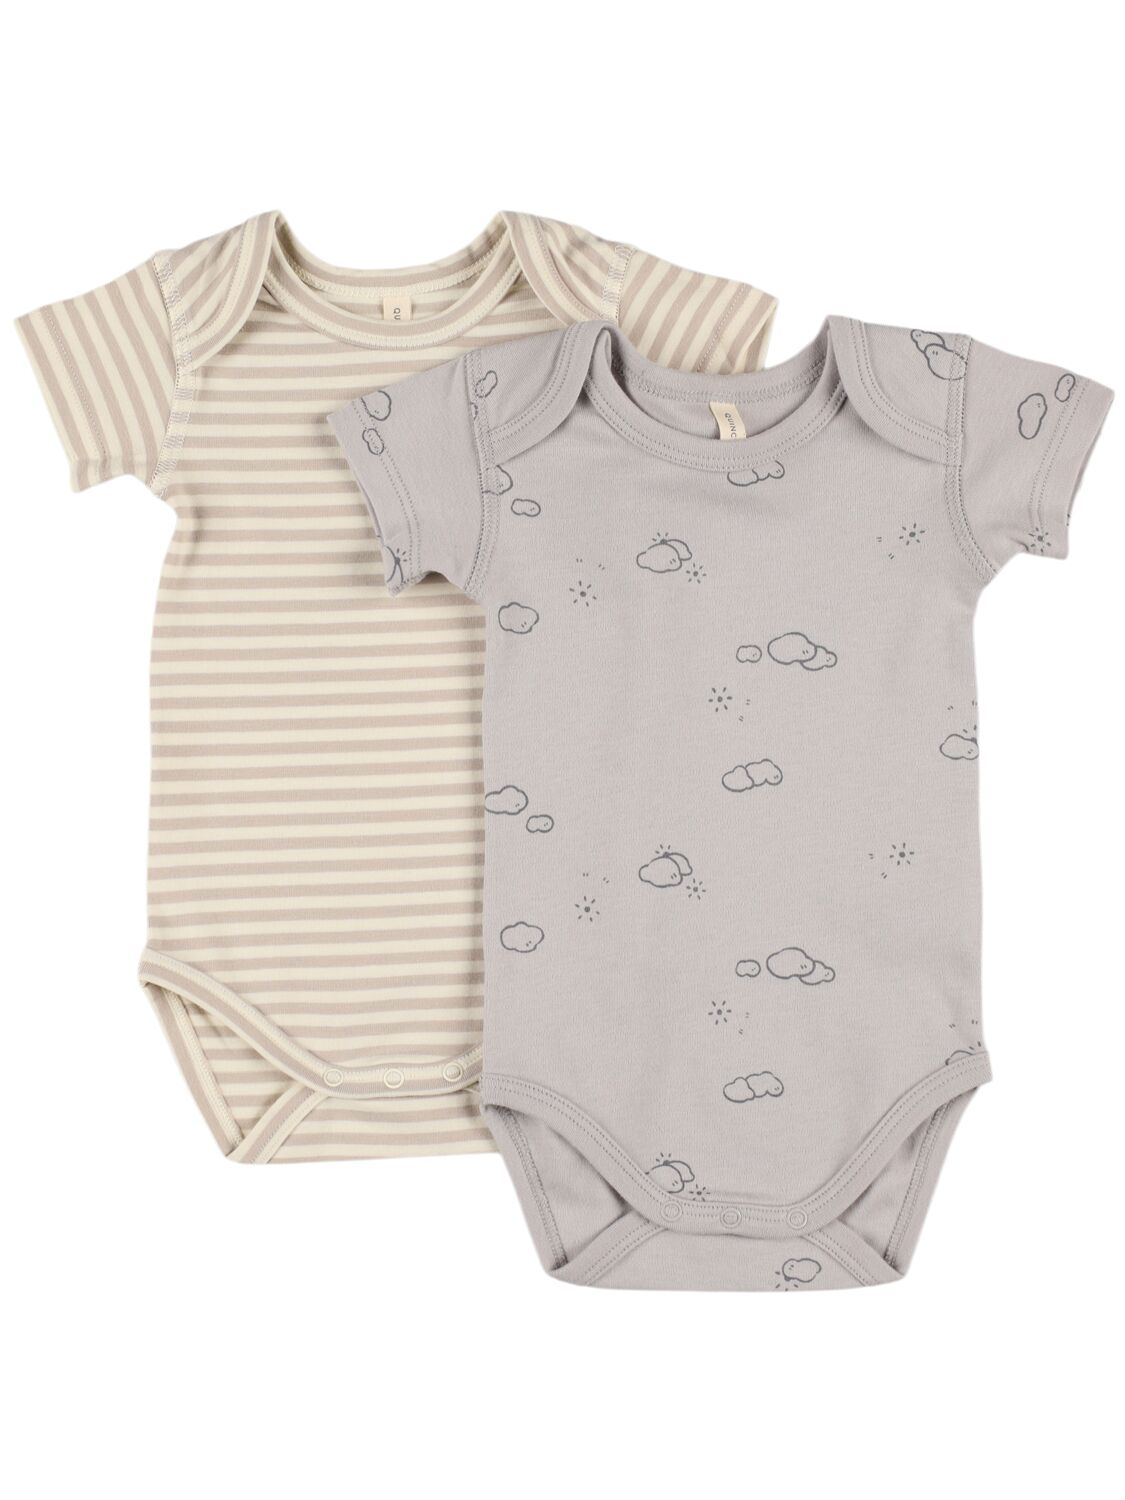 Quincy Mae Babies' Set Of 2 Organic Cotton Bodysuits In Multicolor